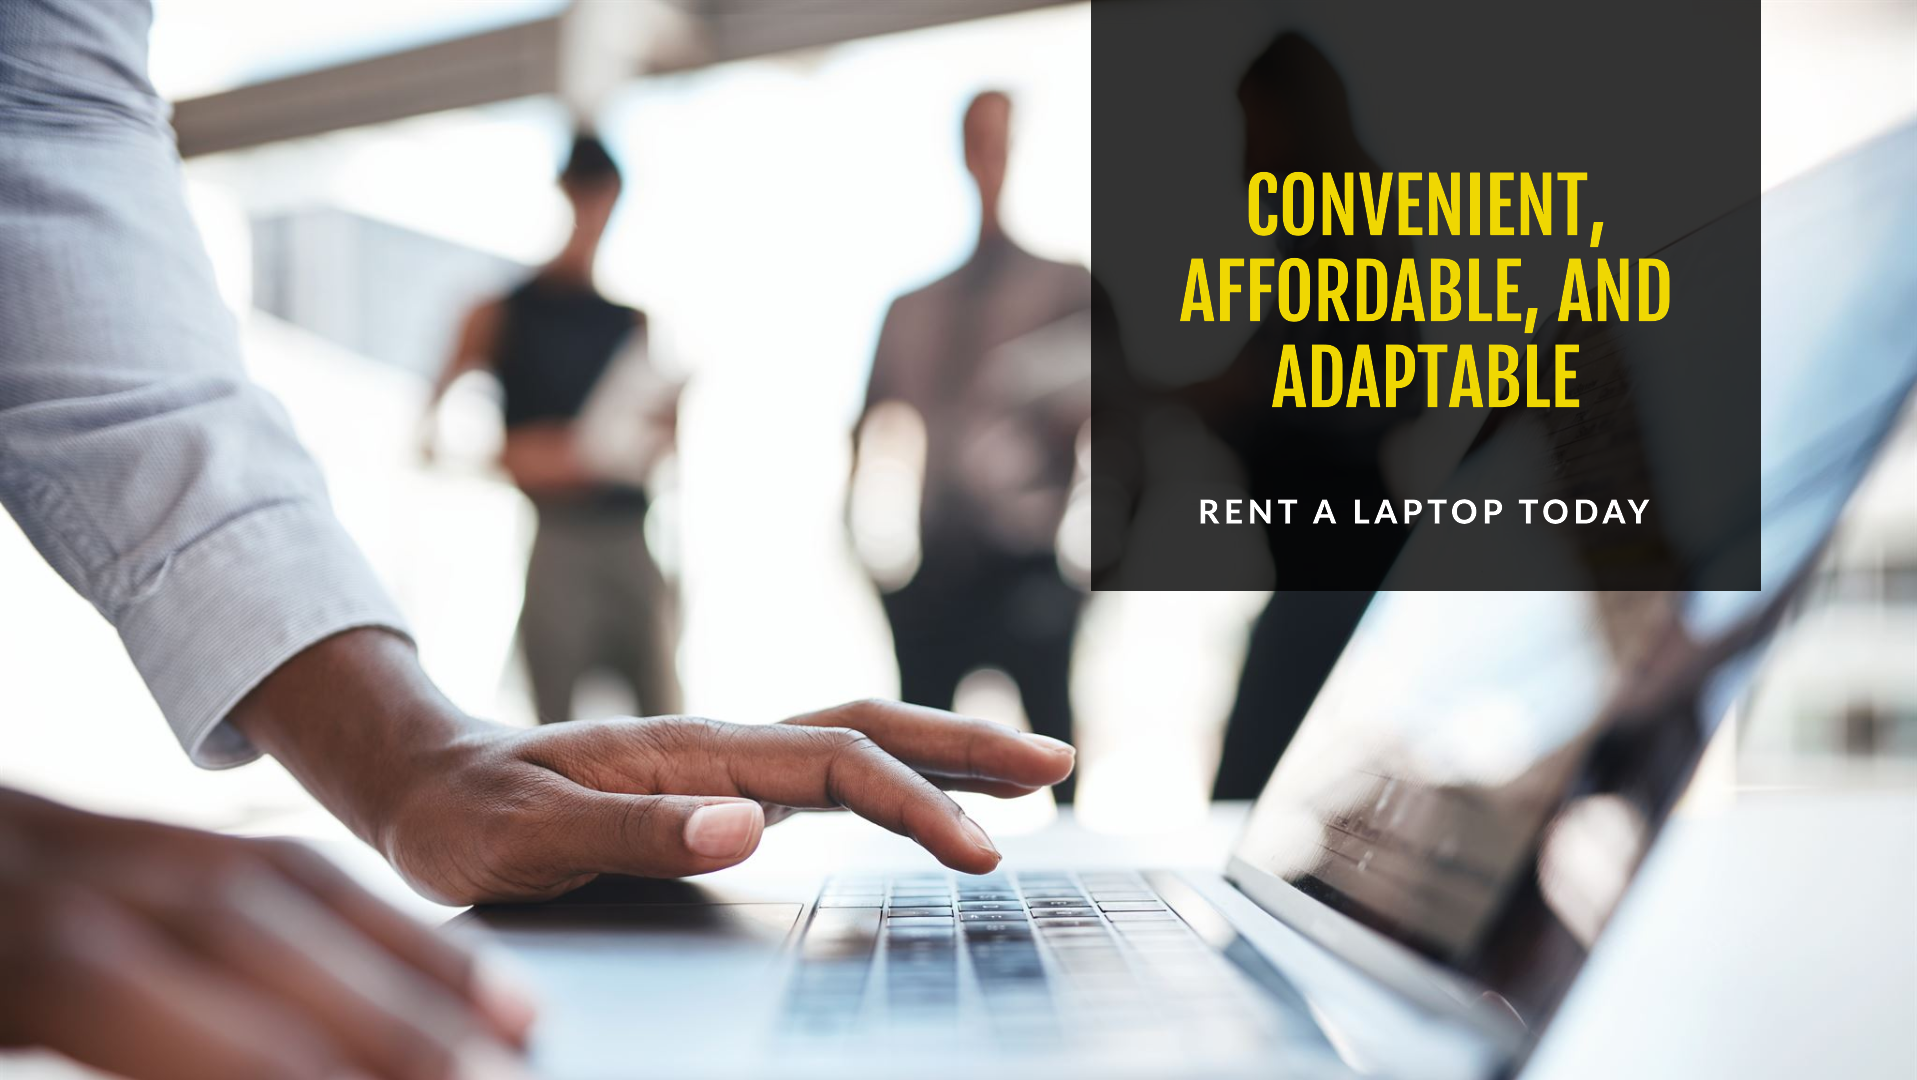 Laptop Rental: Convenience, Affordability, and Adaptability